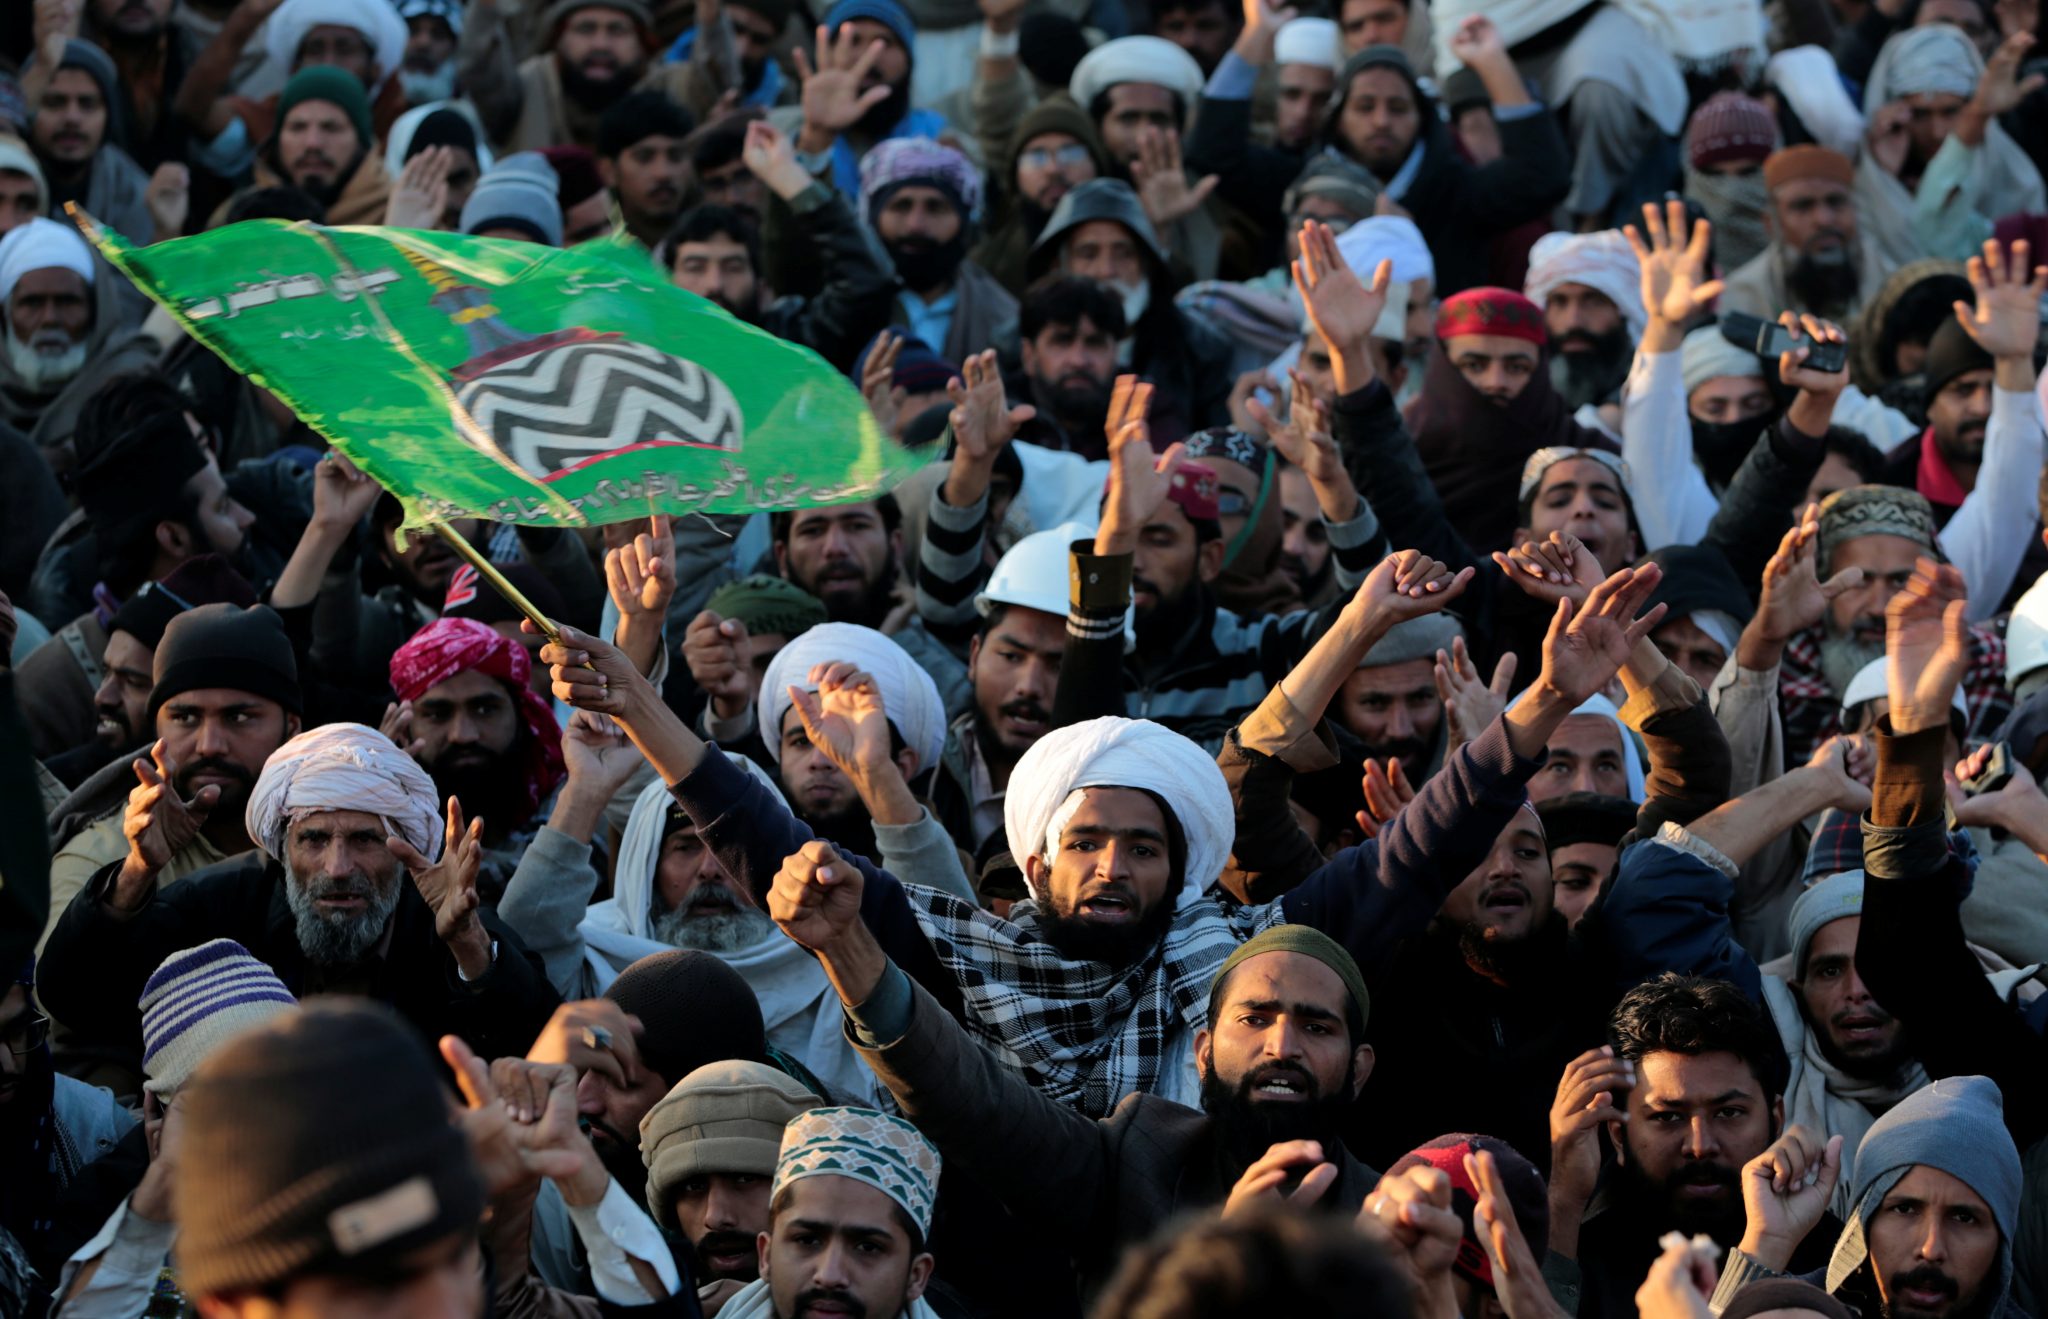 Supporters of the Tehrik-e-Labaik Pakistan (TLP) Islamist political party shout slogans as their leader speaks with the media at their protest site at Faizabad junction in Islamabad | REUTERS